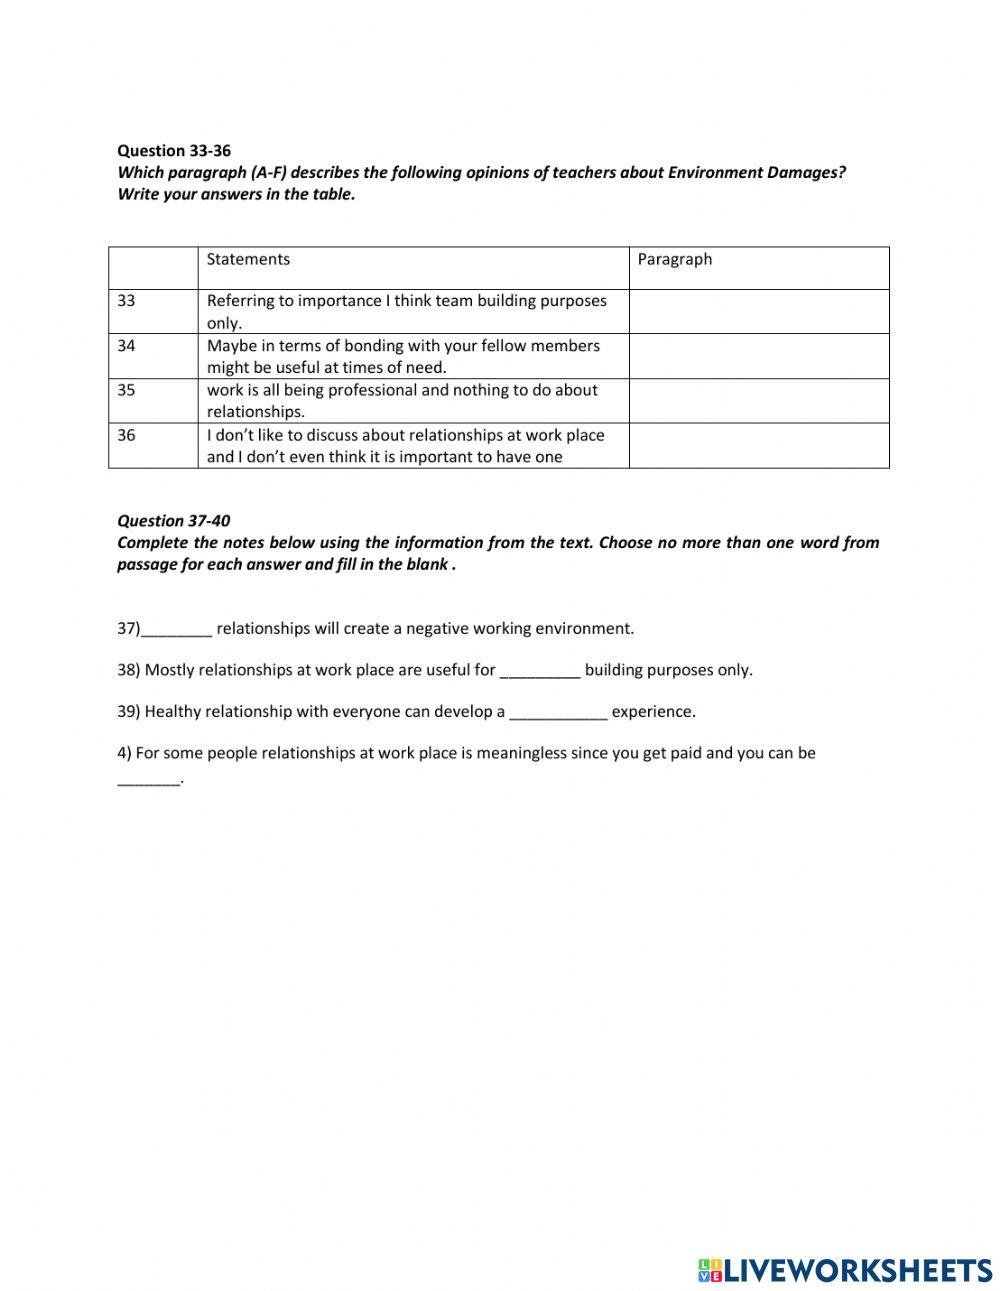 Spm cefr drilling worksheet part 4 and part 5 reading paper